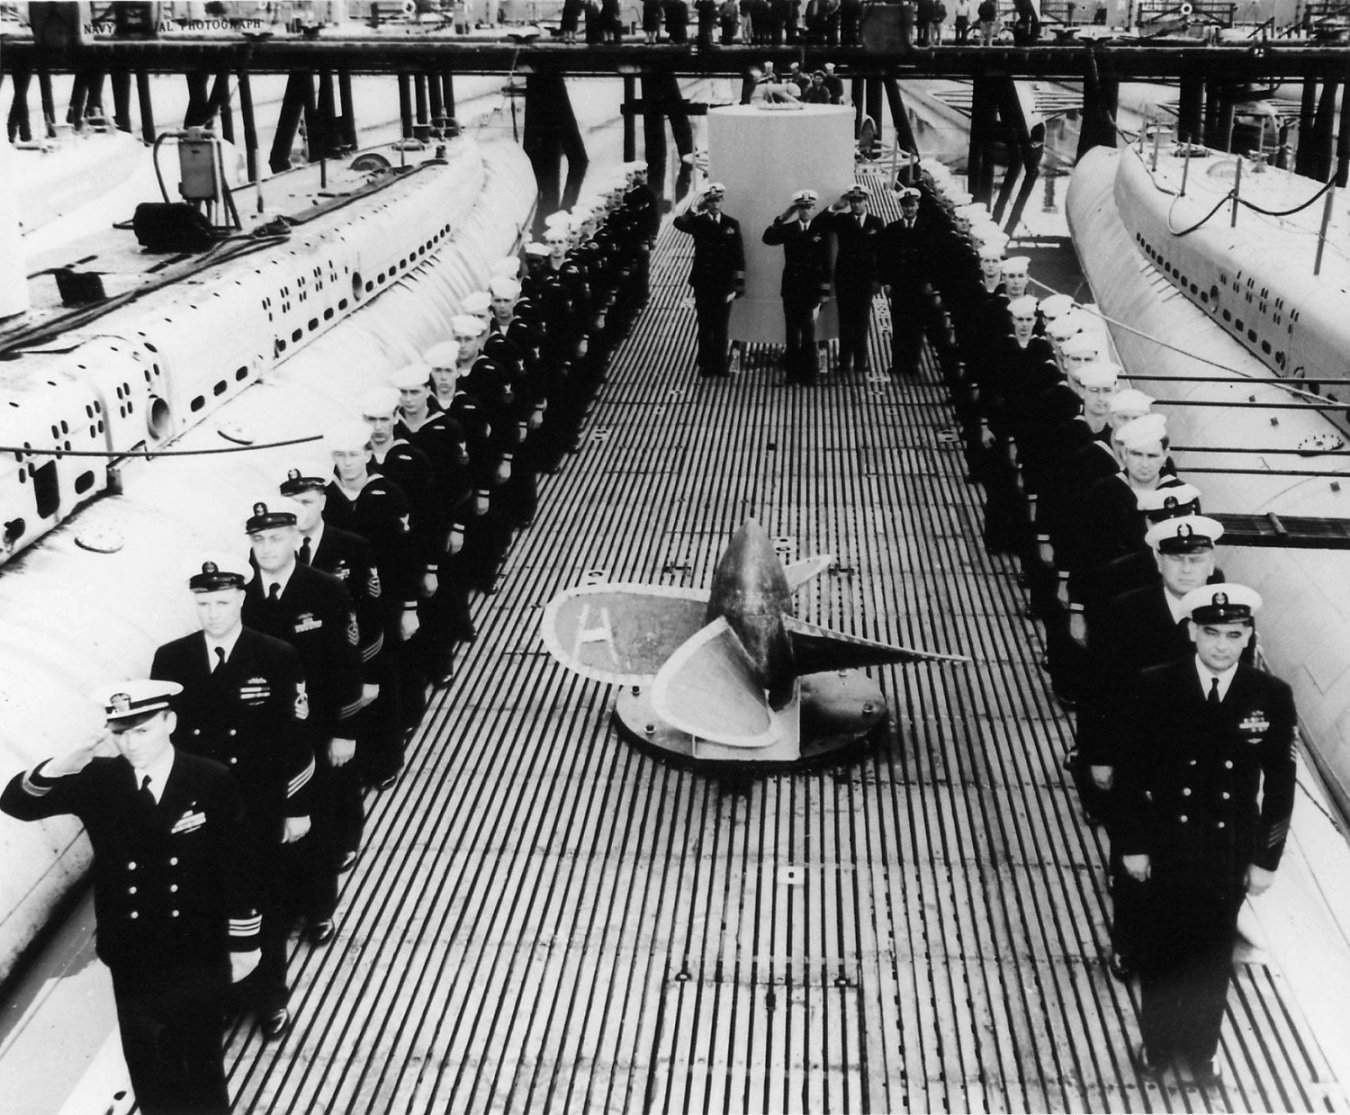 Decommissioning ceremony of USS Capitaine, Mare Island Navy Yard, Vallejo, California, United States, 10 Feb 1950